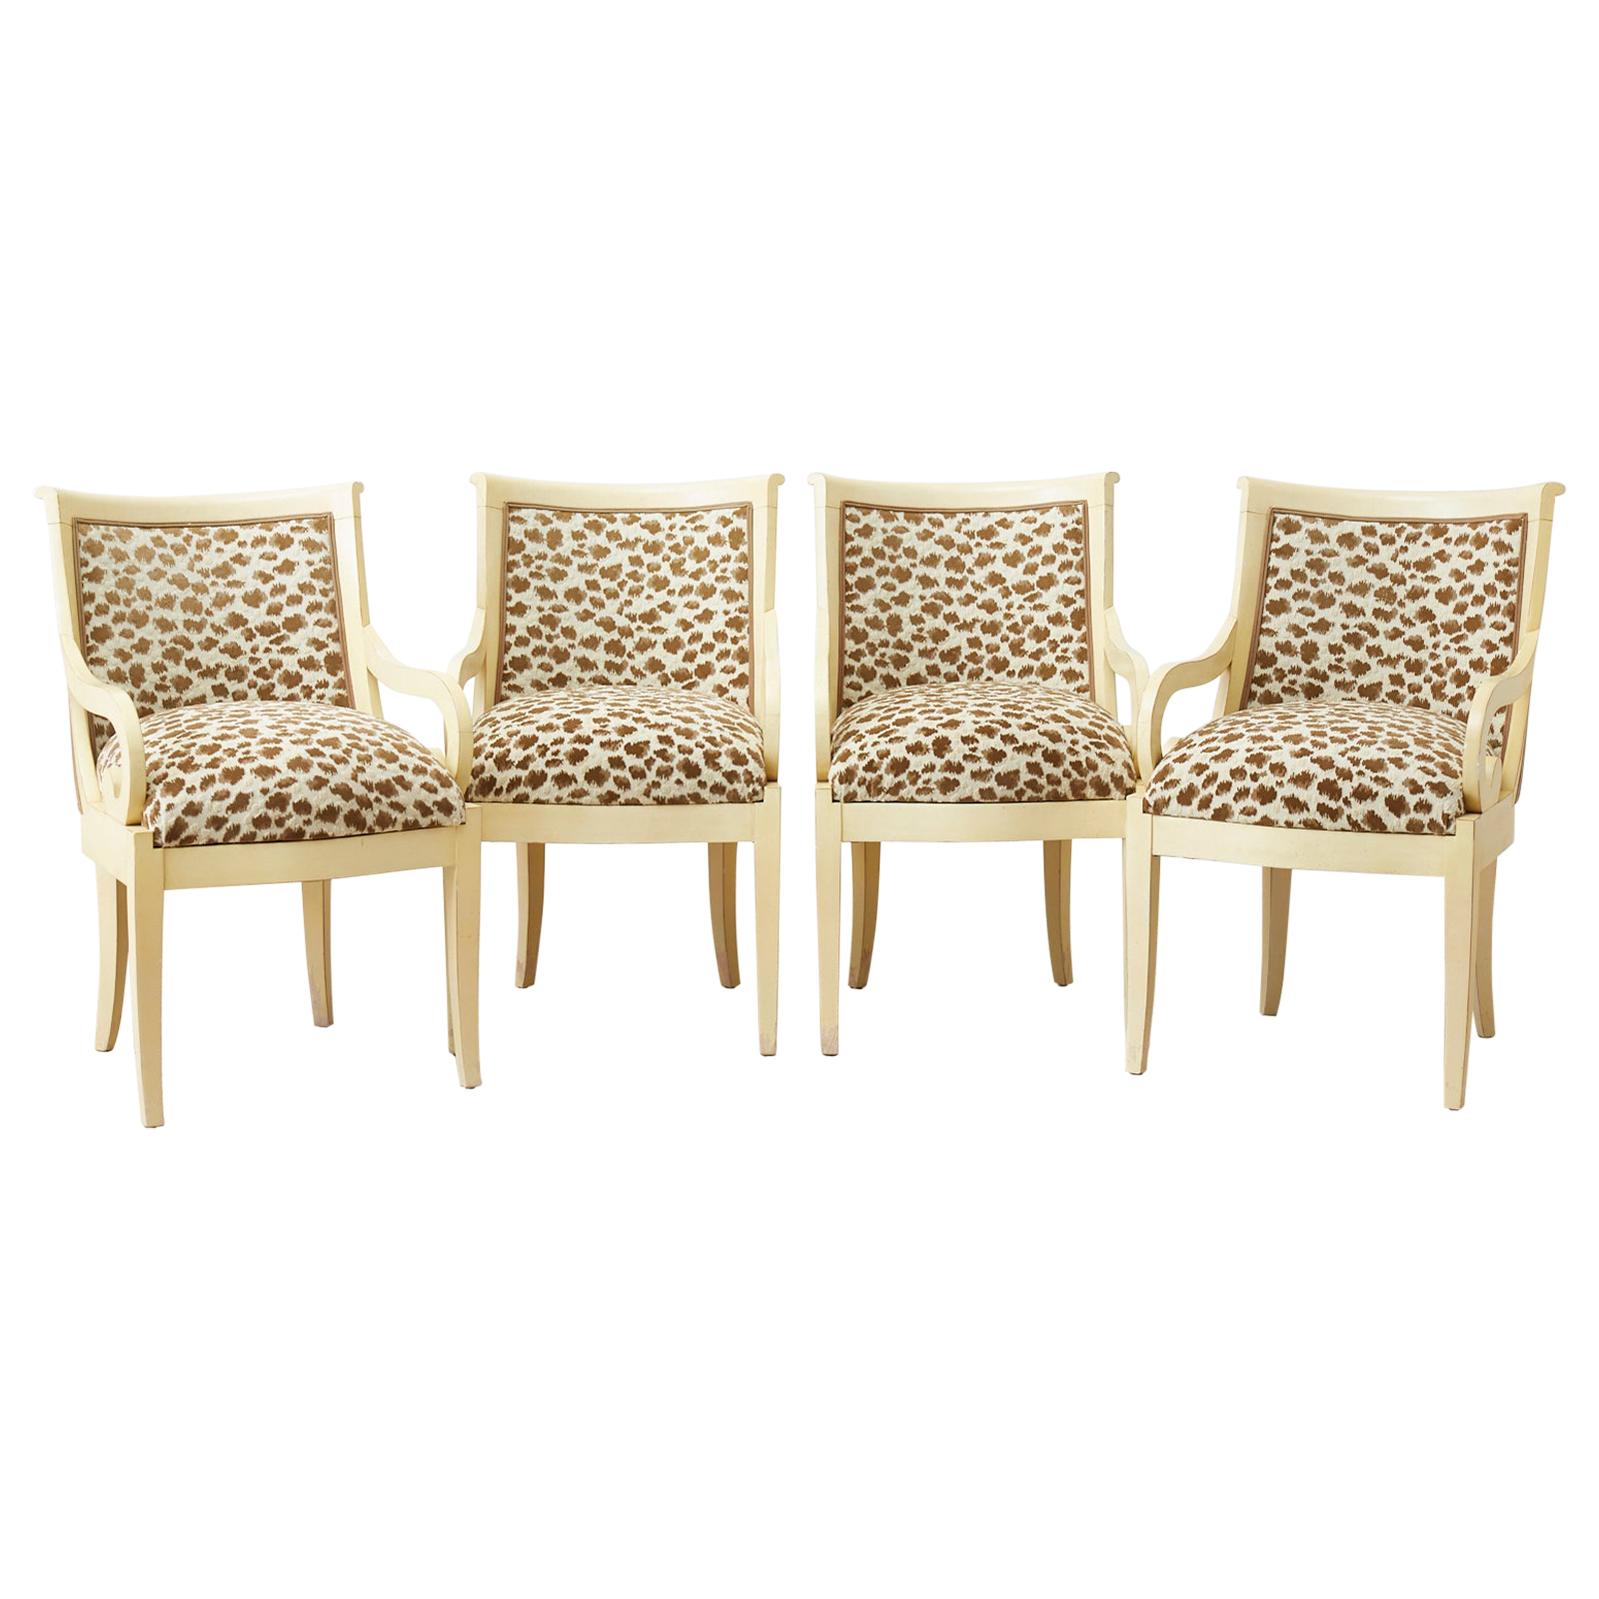 Set of Four Regency Style Lacquered Dining or Armchairs